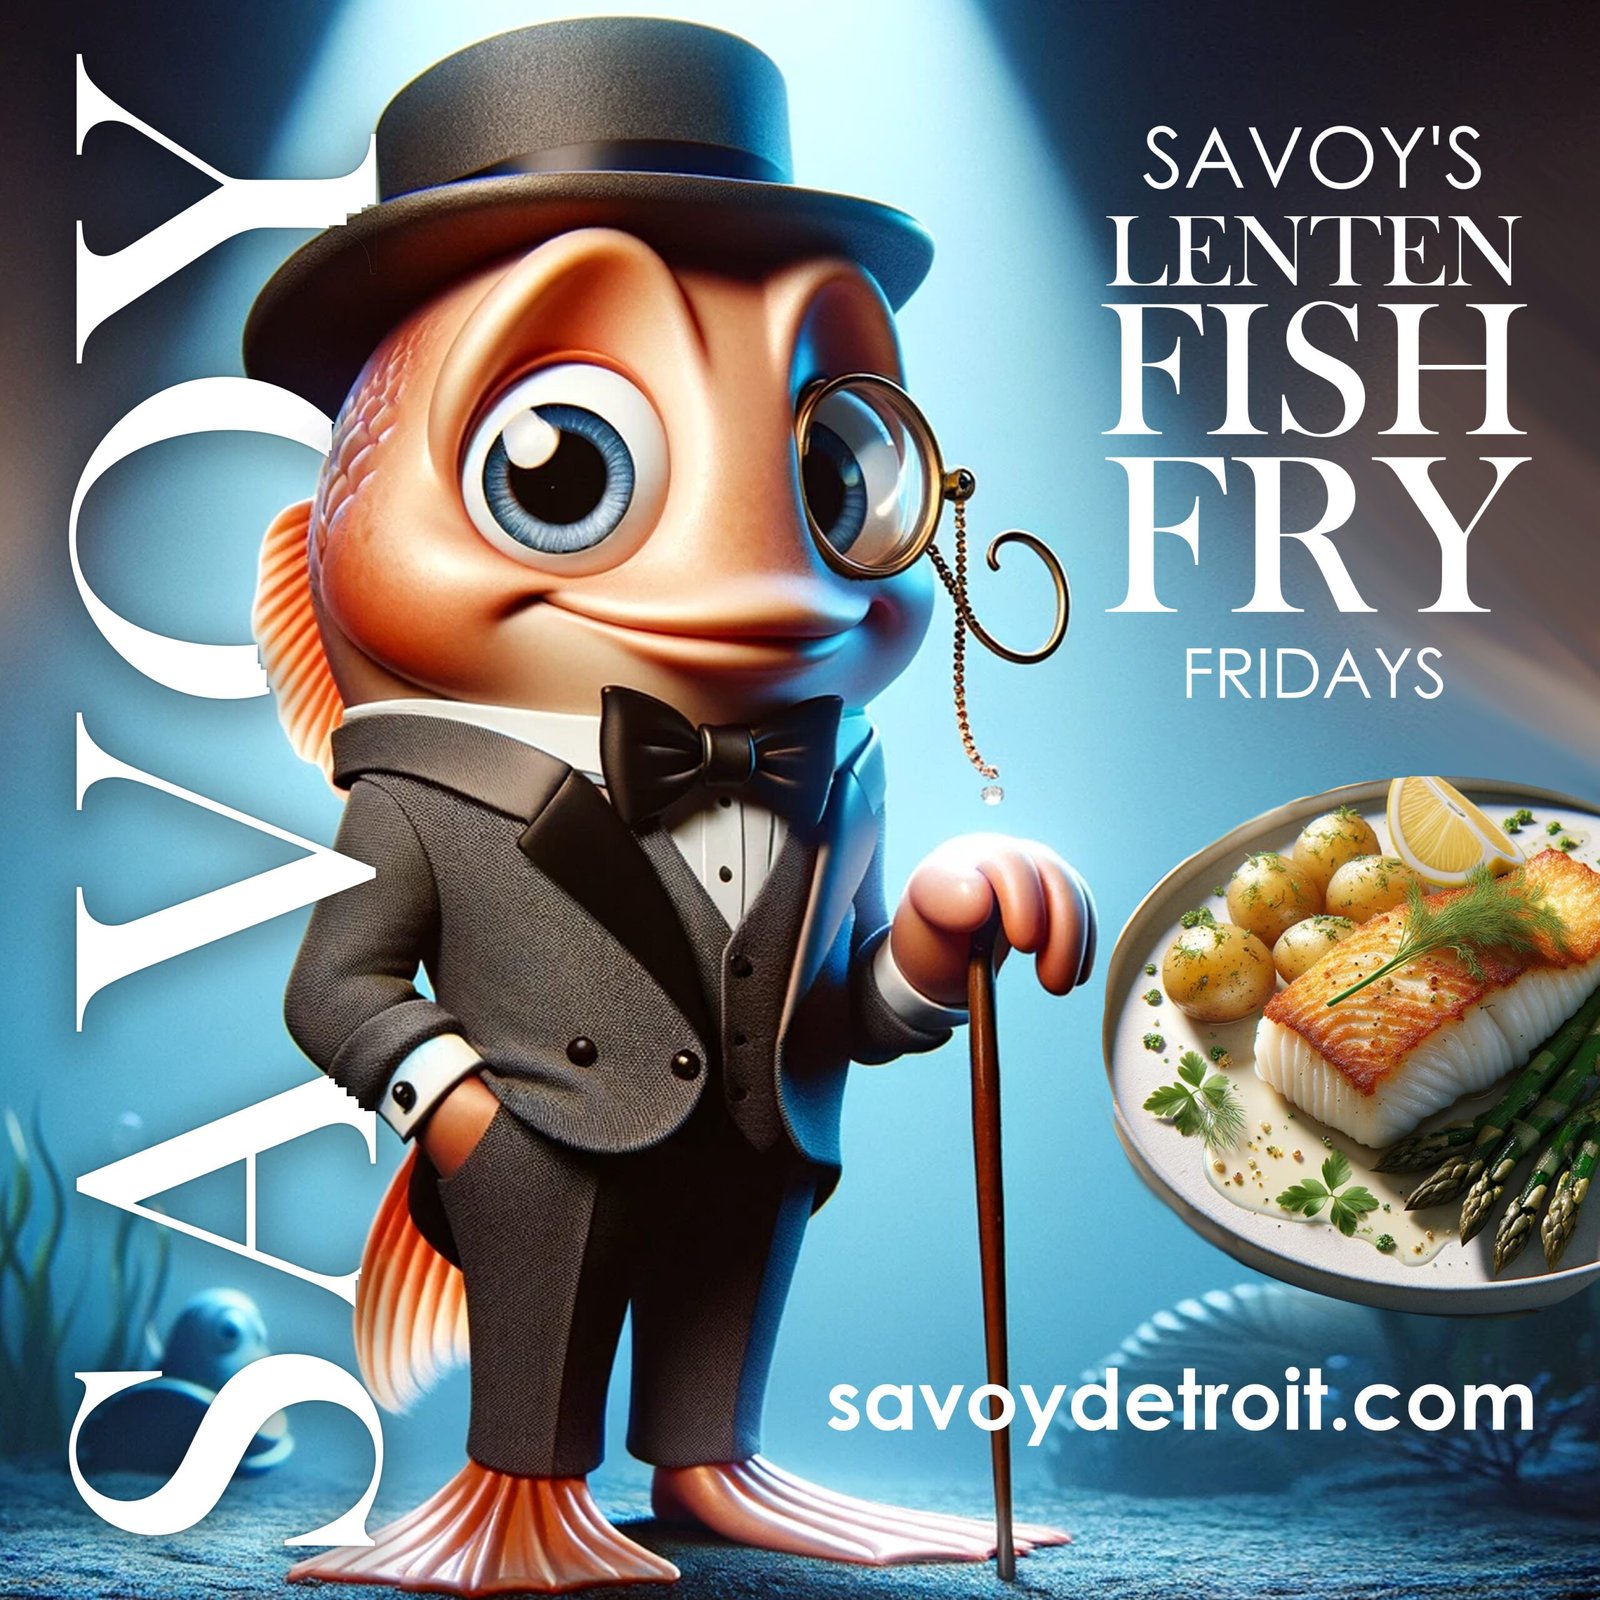 The SAVOY Restaurant Observes lent by offering a Friday Fish Fry